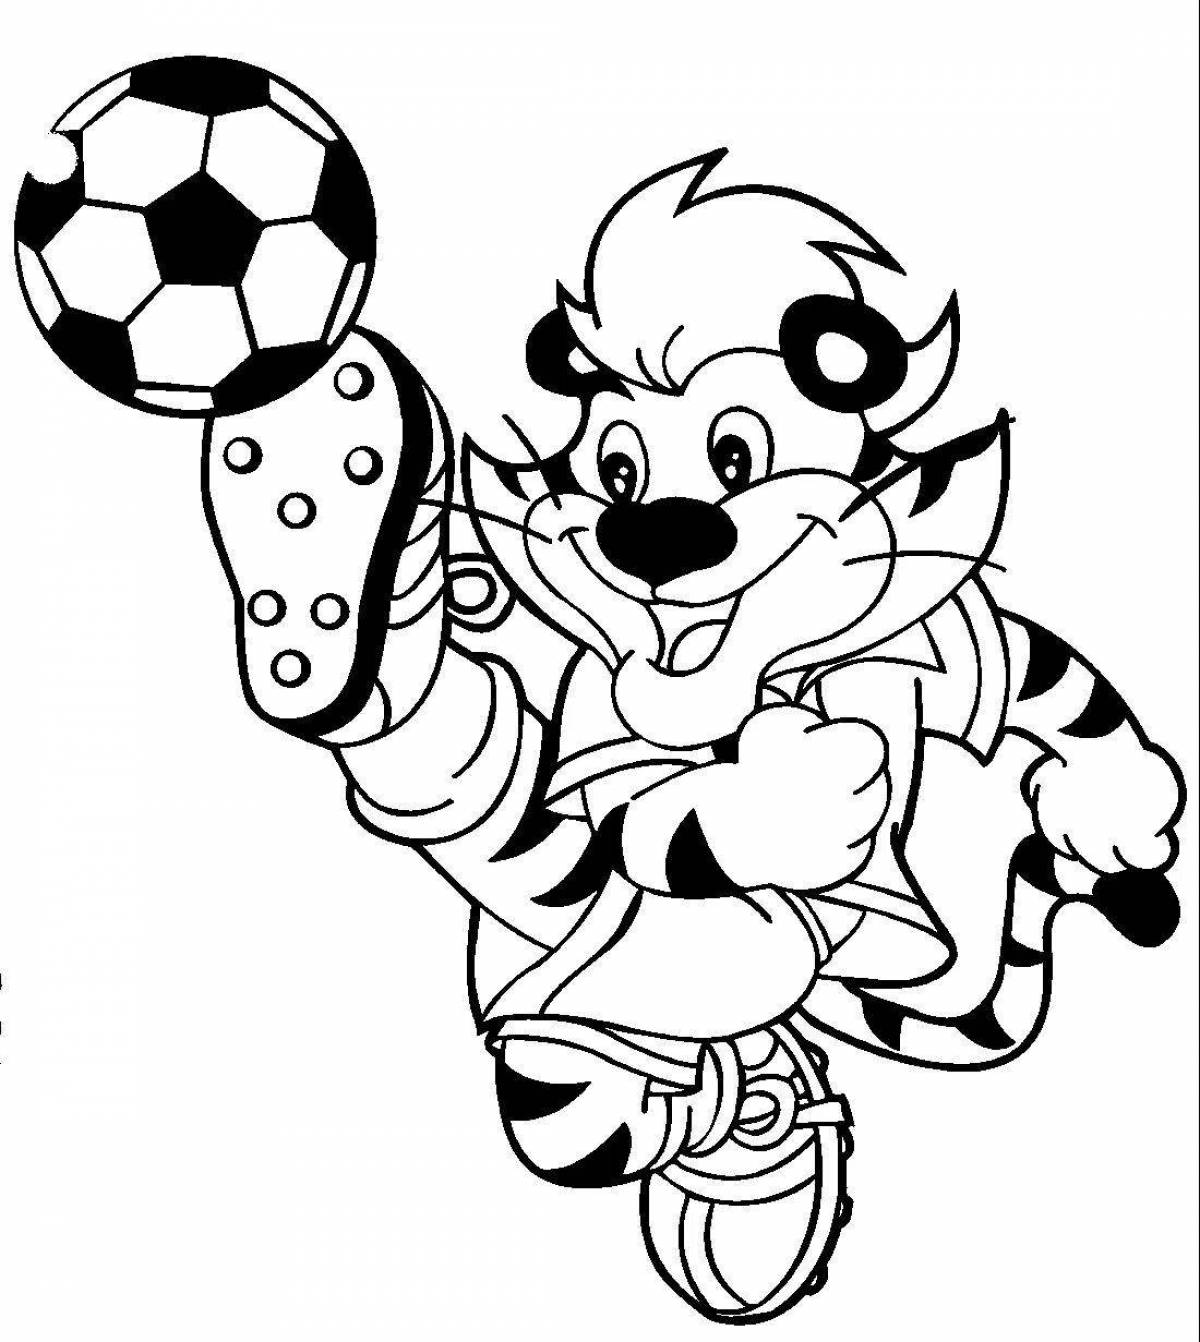 Coloring page glowing football cup